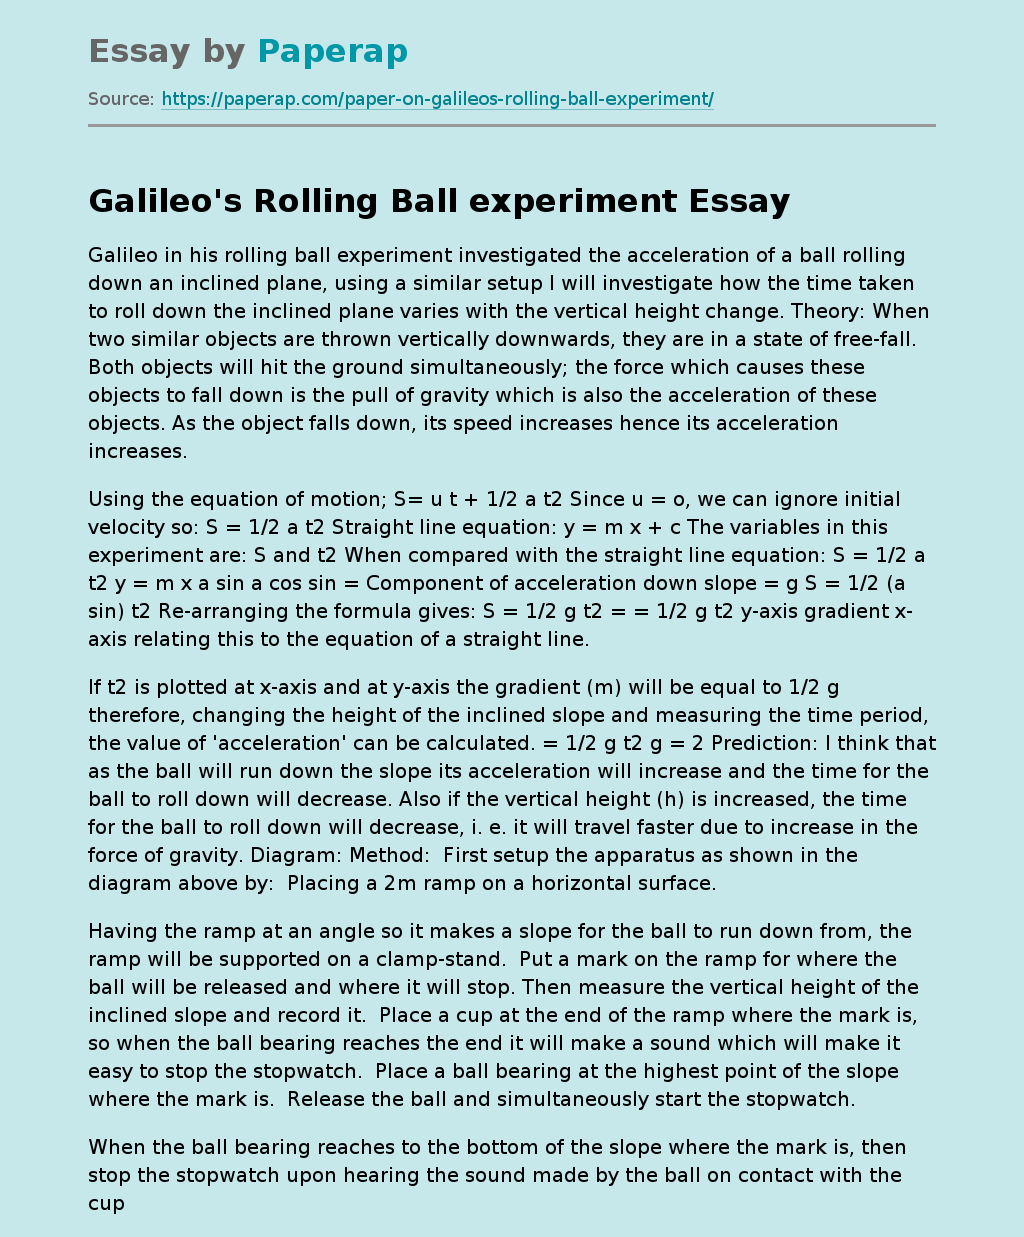 Galileo's Rolling Ball experiment